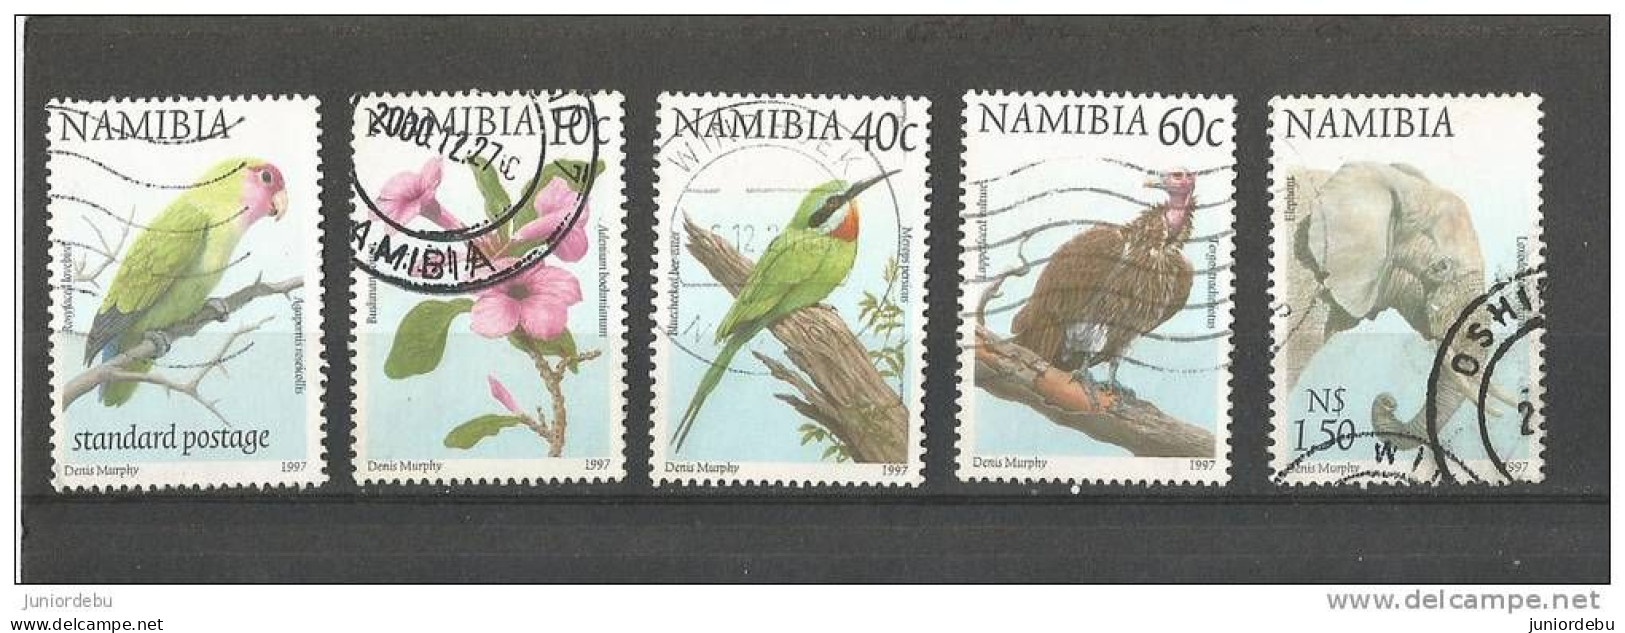 Namibia  - 1997  - Flower / Birds / Elephant - 5 Different - USED. ( D ) ( Condition As Per Scan ) ( OL 05/05/2013 ) - Namibia (1990- ...)